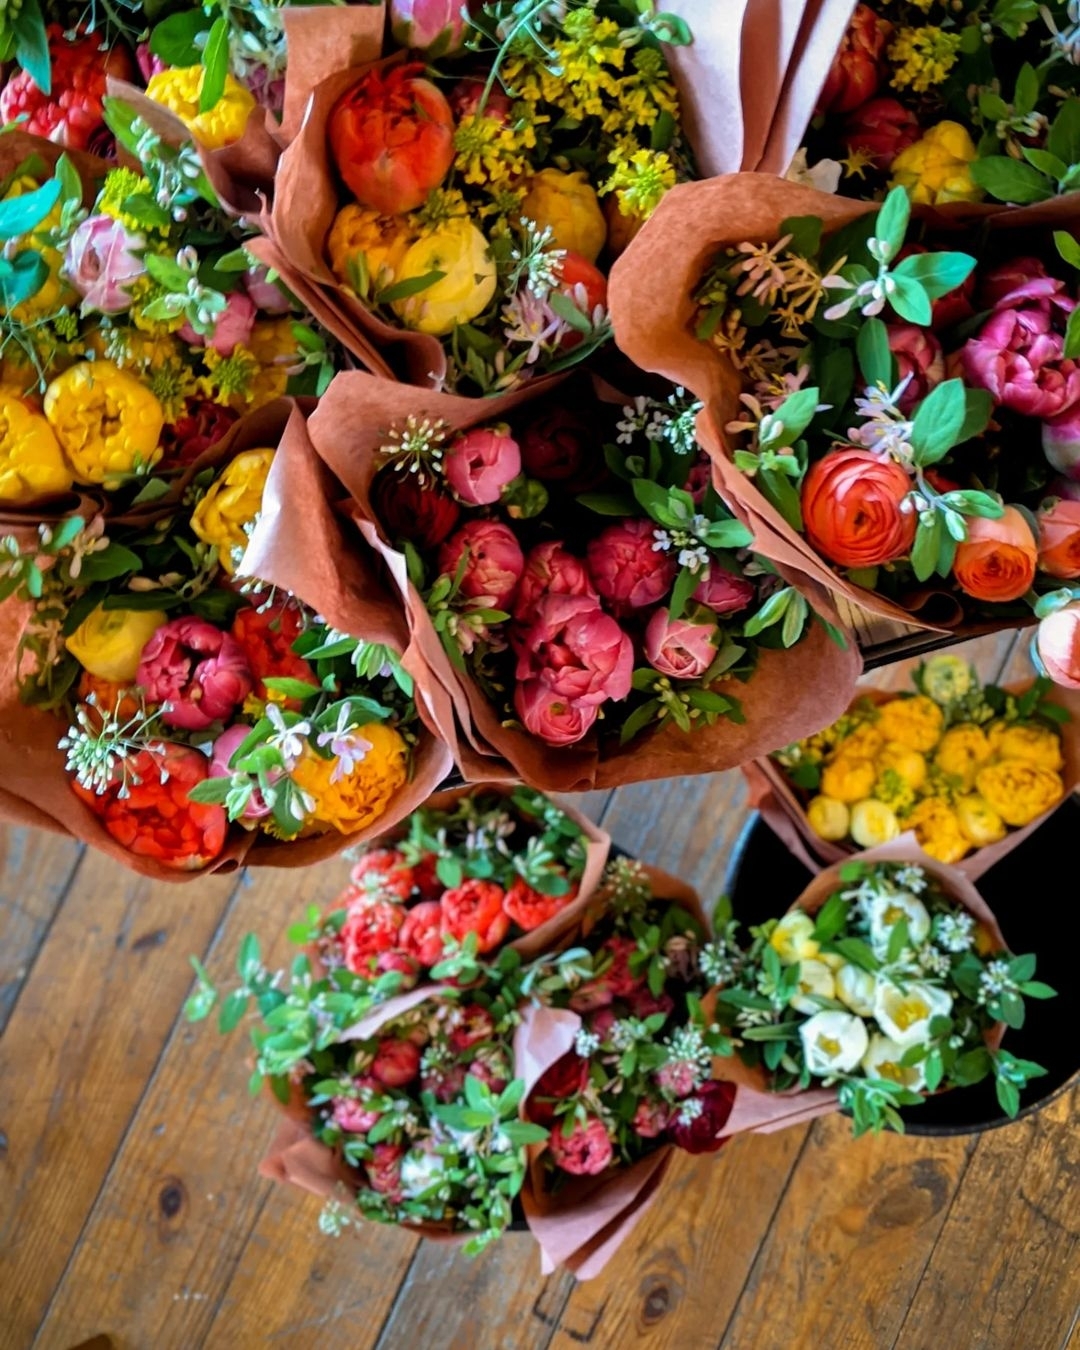 Valentine's Day is coming up! Make the day special by pre-ordering a Valentine's Day Bouquet from #HVAgventures destination @rootedfarmstead 